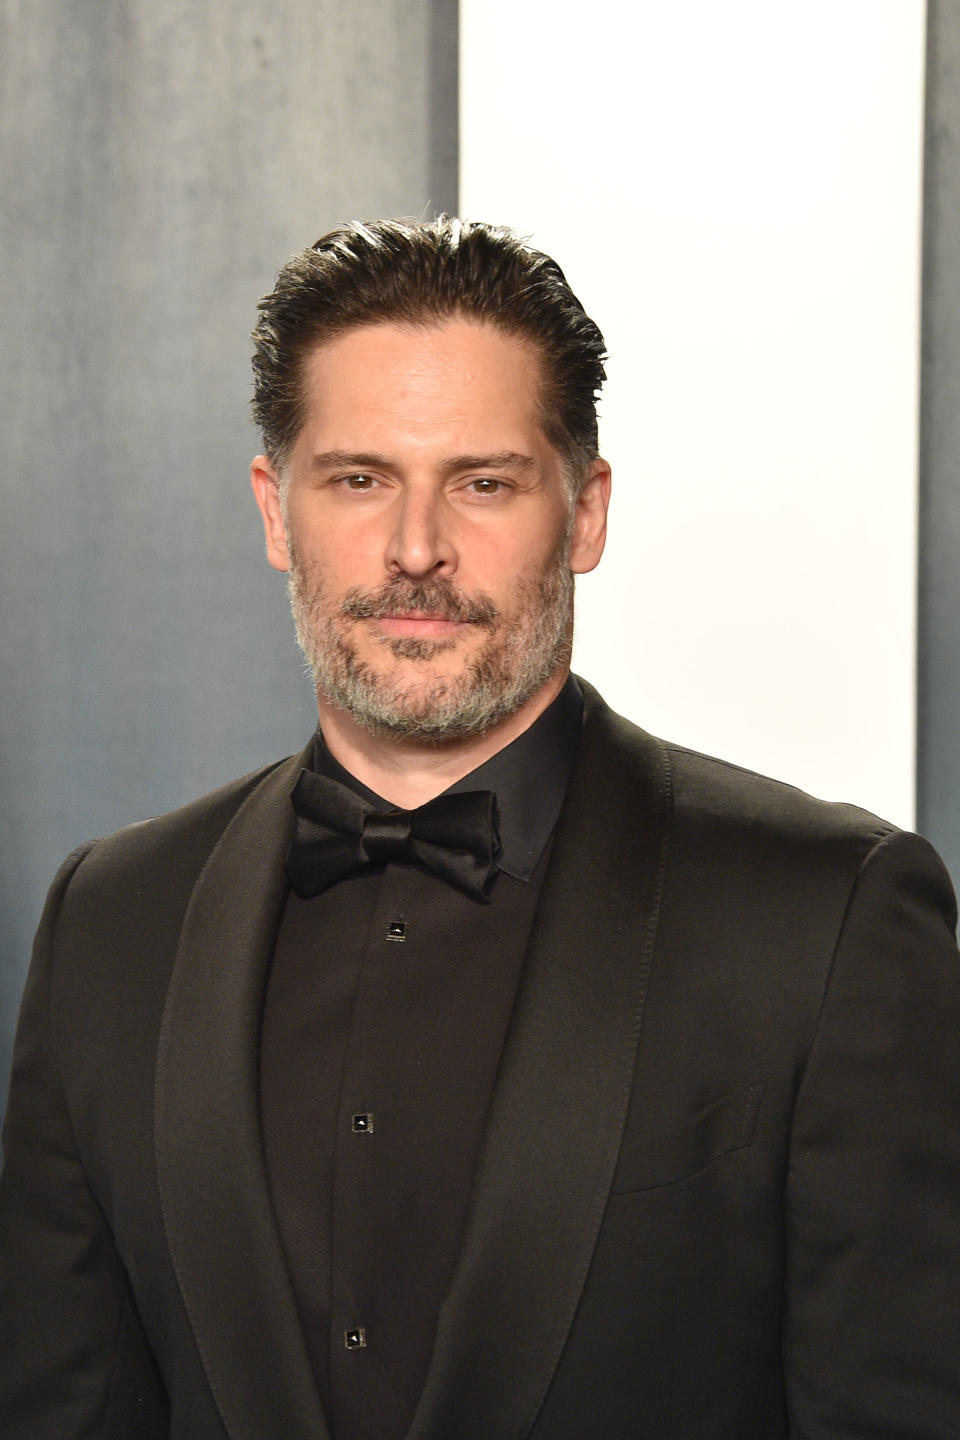 BEVERLY HILLS, CALIFORNIA - FEBRUARY 09: Joe Manganiello attends the 2020 Vanity Fair Oscar Party at Wallis Annenberg Center for the Performing Arts on February 09, 2020 in Beverly Hills, California. (Photo by David Crotty/Patrick McMullan via Getty Images)